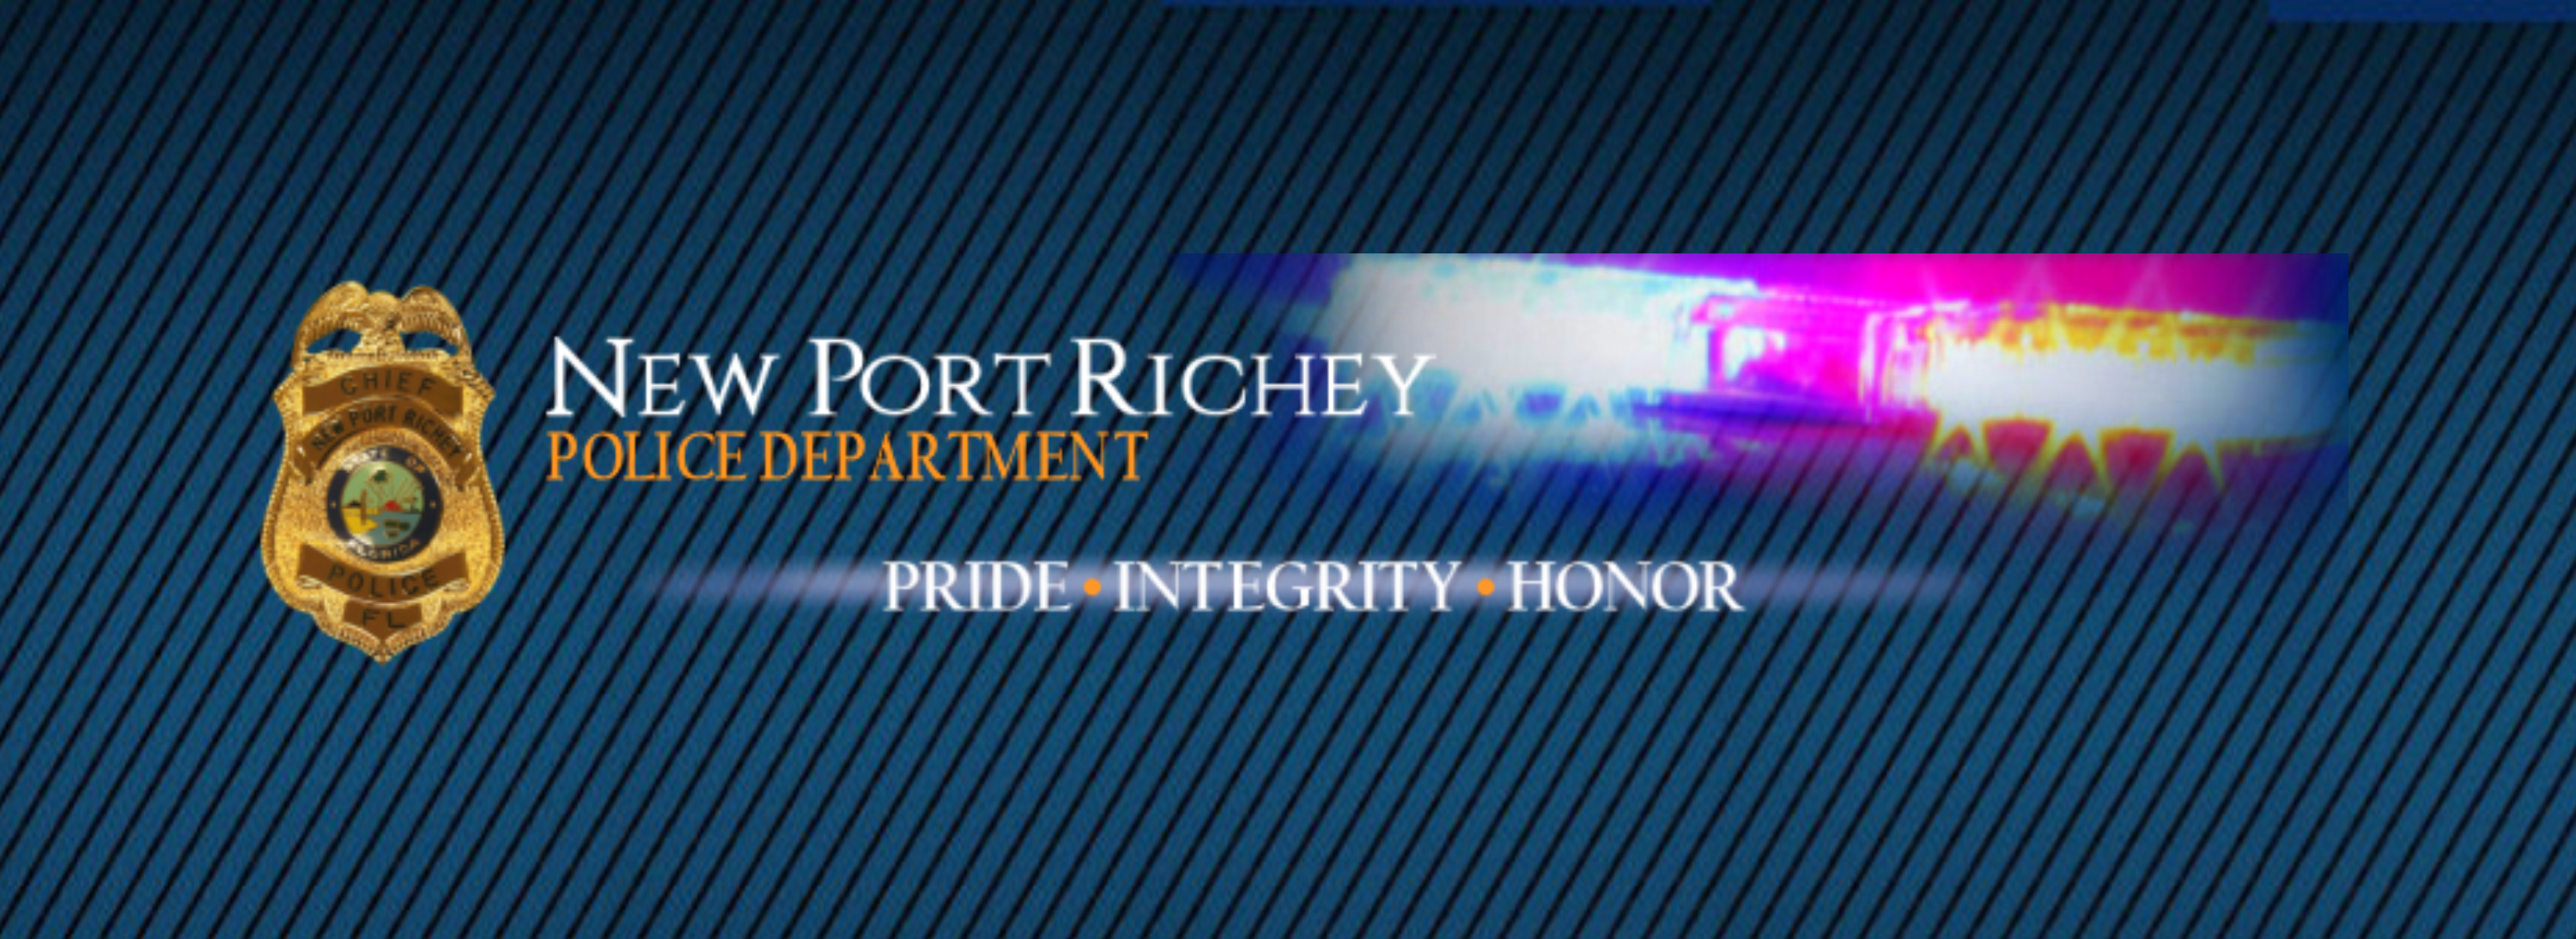 The text, "New Port Richey Police Department. Pride. Integrity. Honor" on a dark blue field with a police emergency lights.